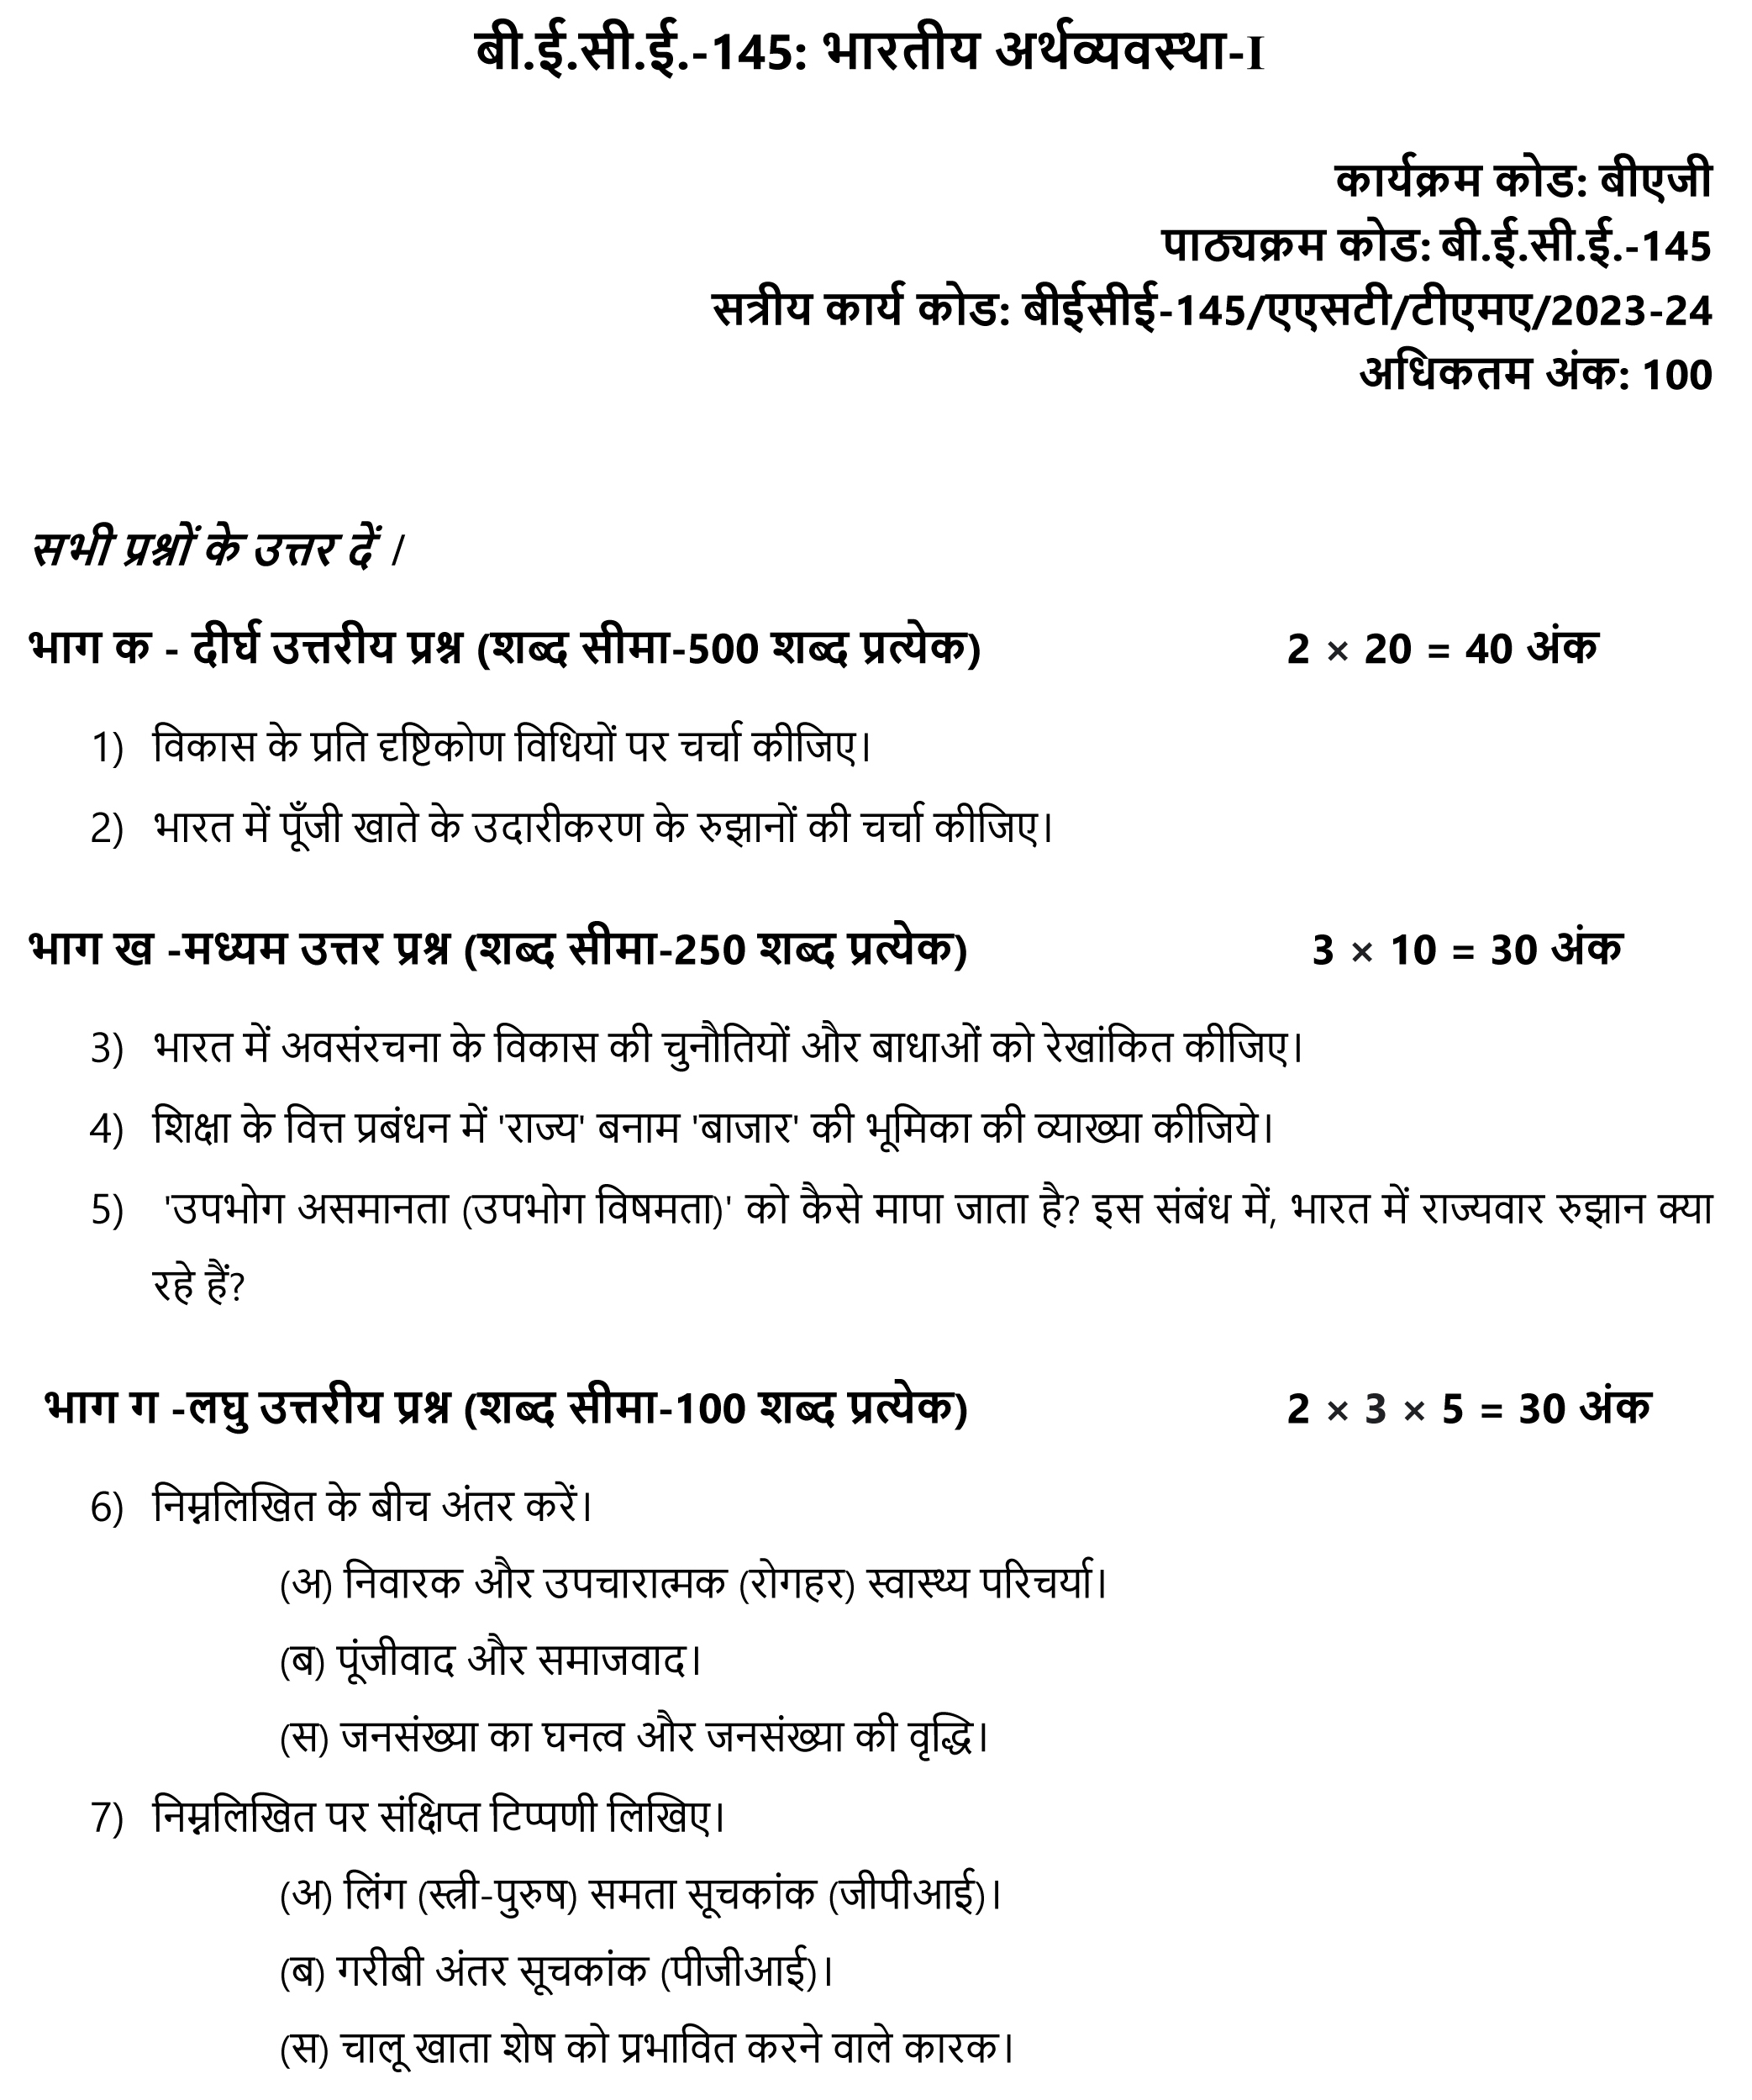 IGNOU BECE-145 - Indian Economy – I, Latest Solved Assignment-July 2023 - January 2024